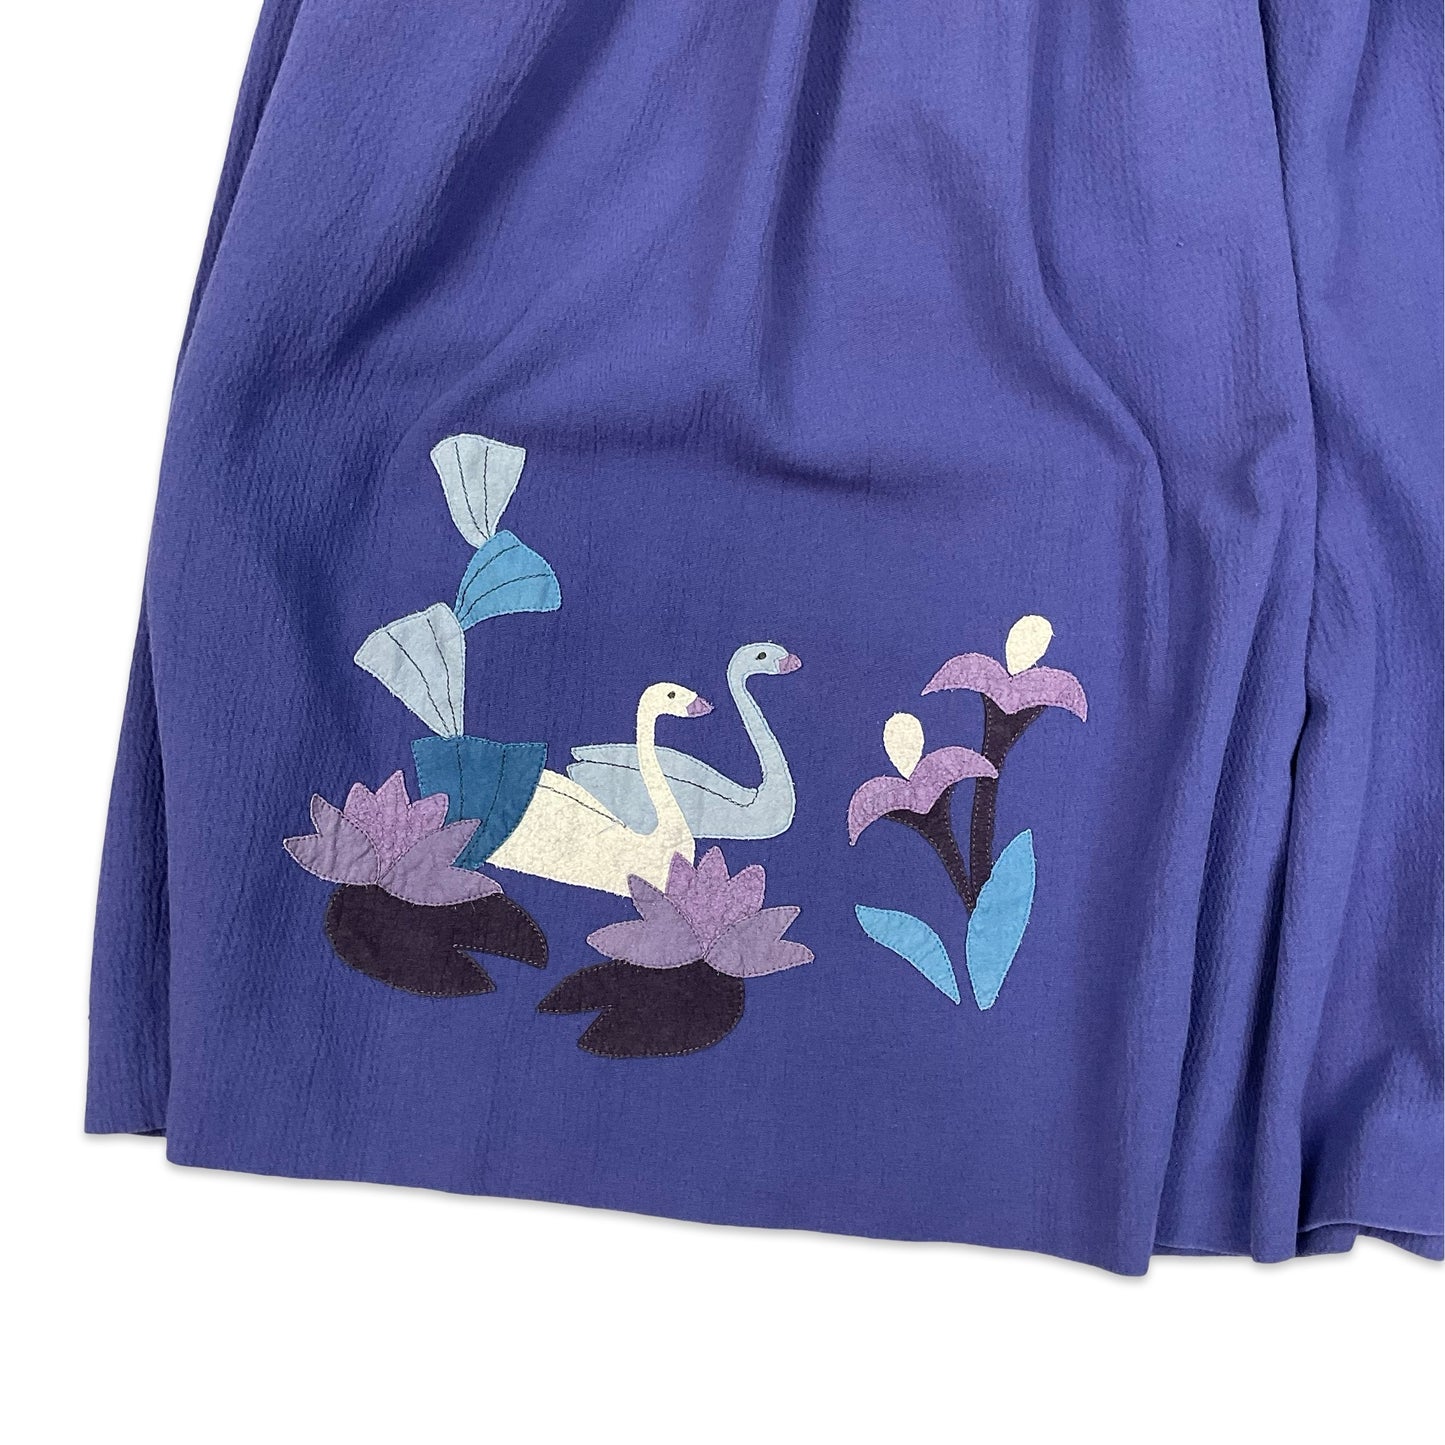 Vintage Purple Pleated Midi Skirt with Embroidered Geese Graphic 10